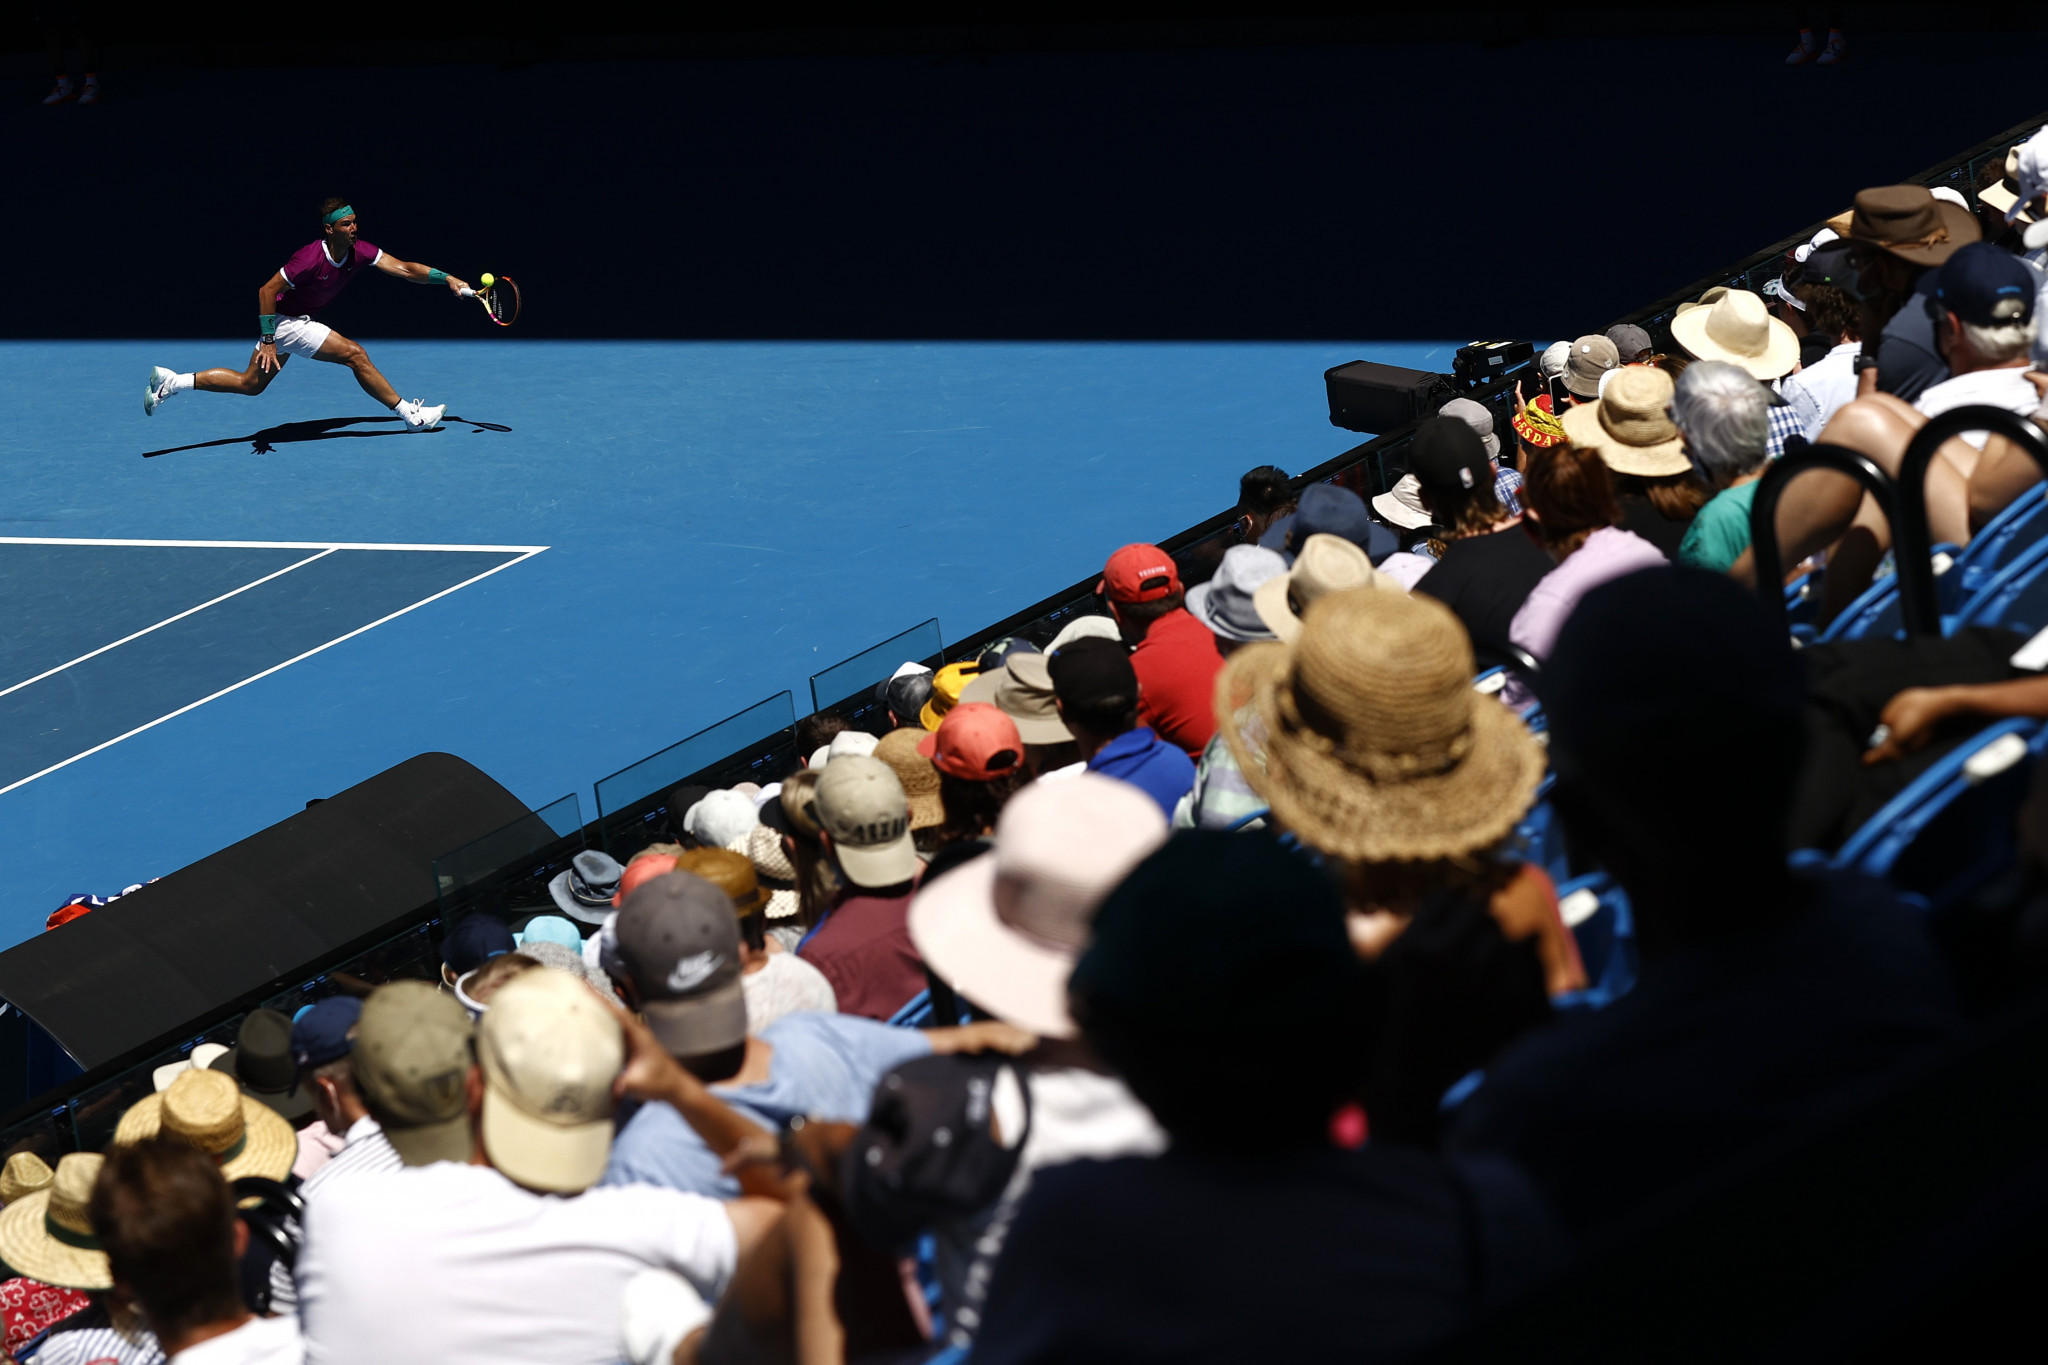 The Melbourne crowd watch on as Nadal stretches for the ball ©Getty Images